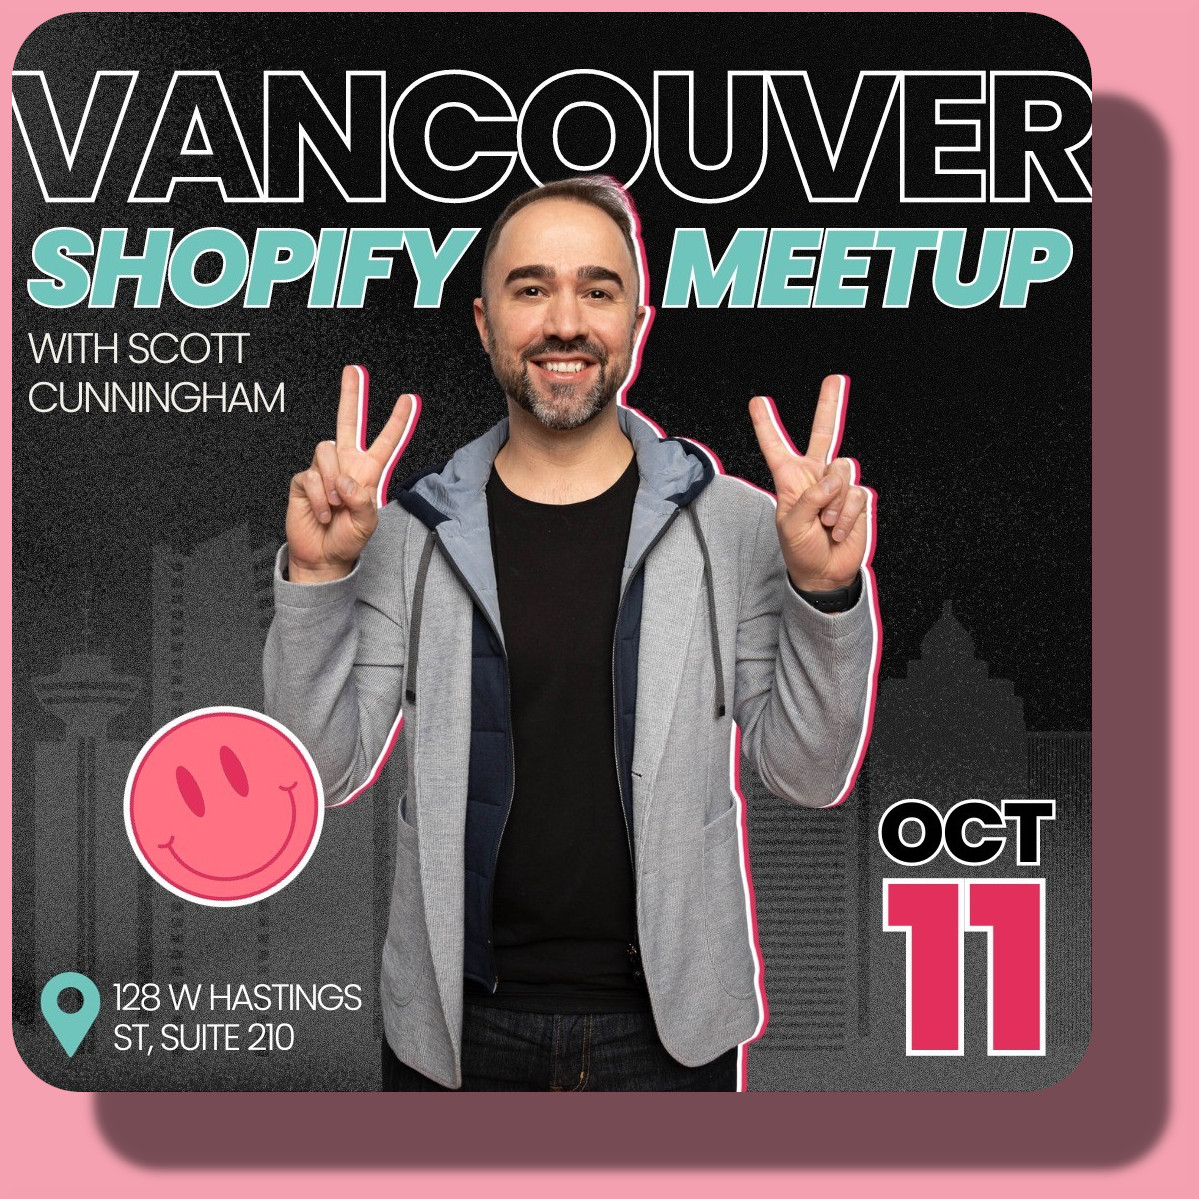 Shopify Meetup Vancouver - October 11th, 128 W Hastings St Suite 210